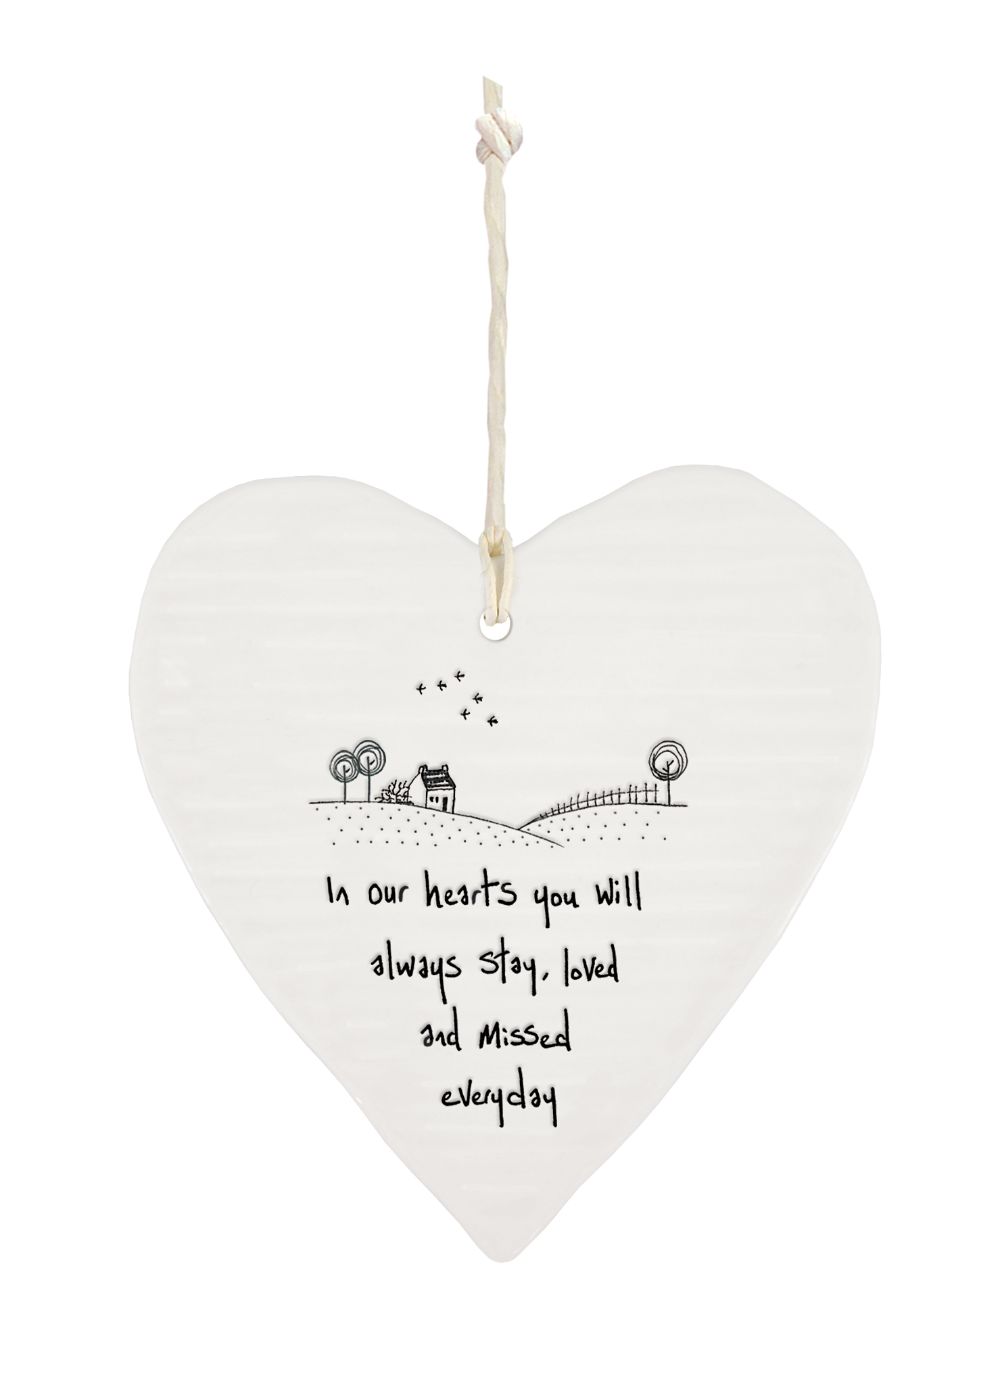 East Of India Missed Everyday Wobbly Heart Shaped Ceramic Hanging Plaque